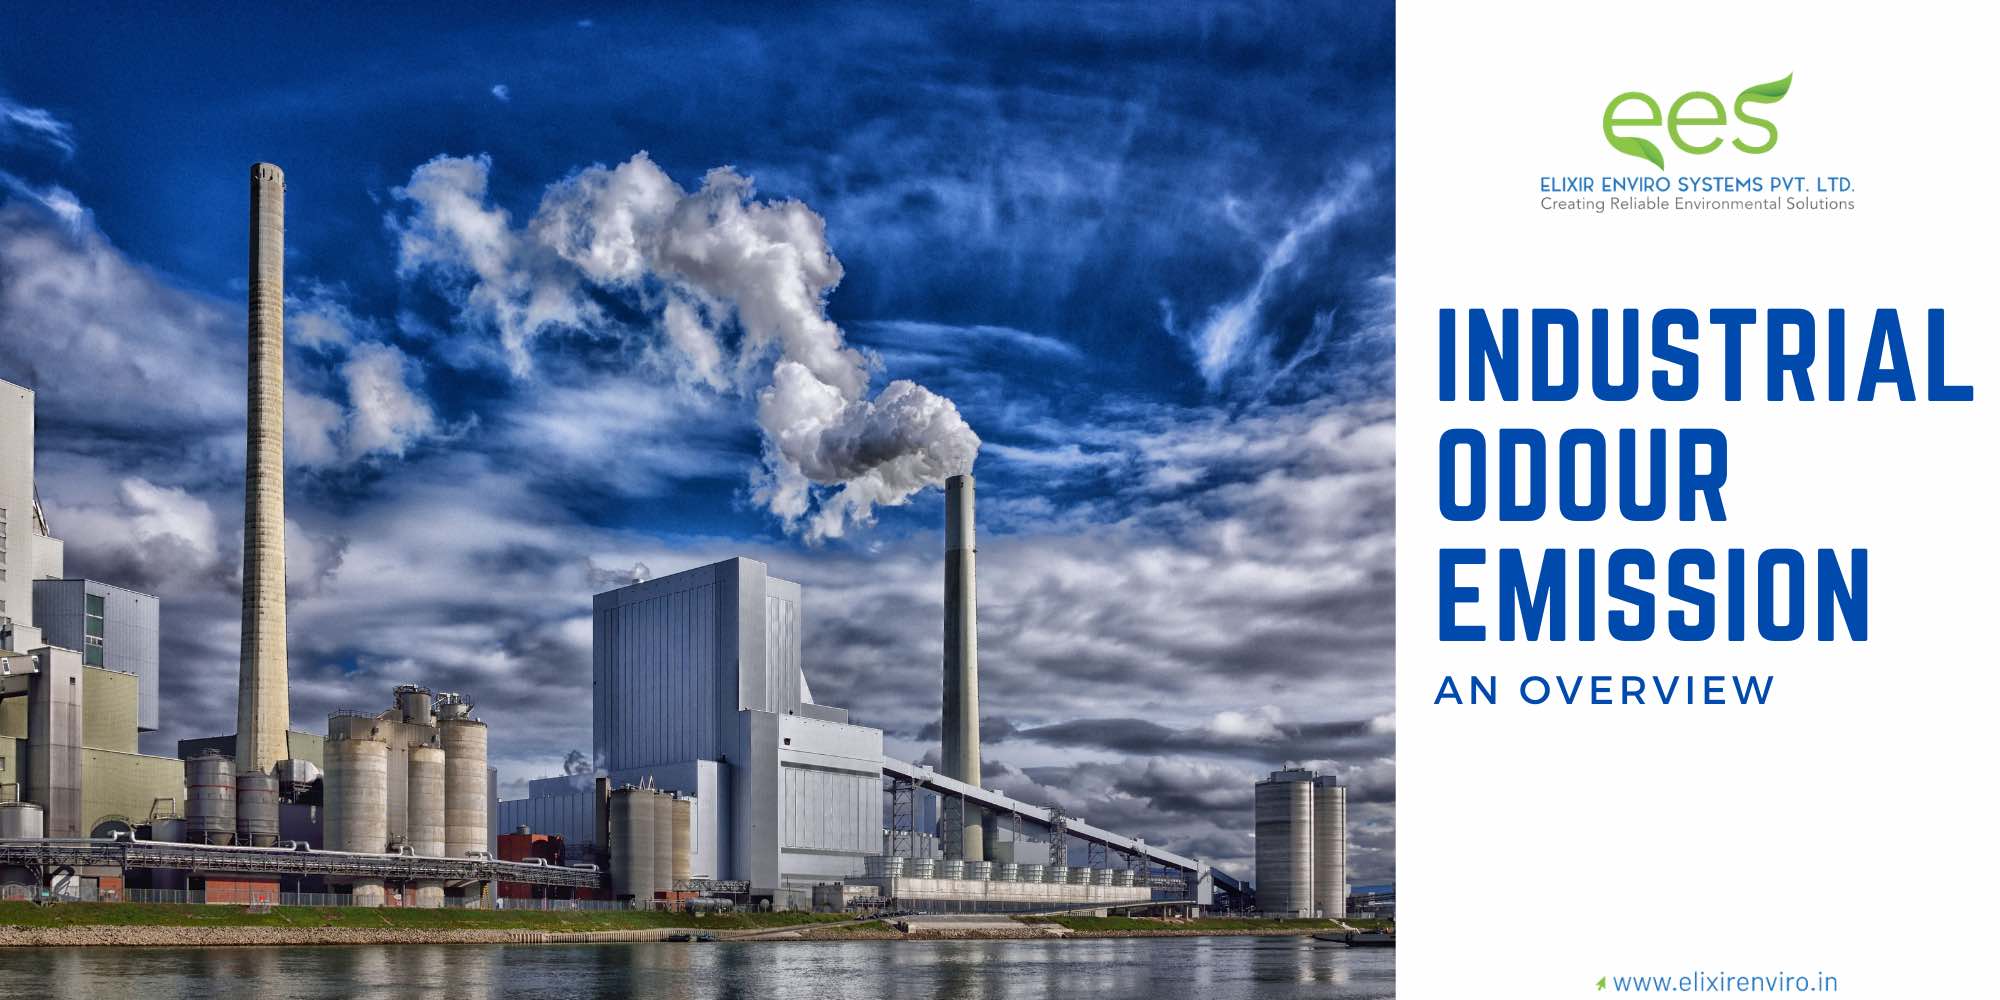 INDUSTRIAL ODOR EMISSION: AN OVERVIEW